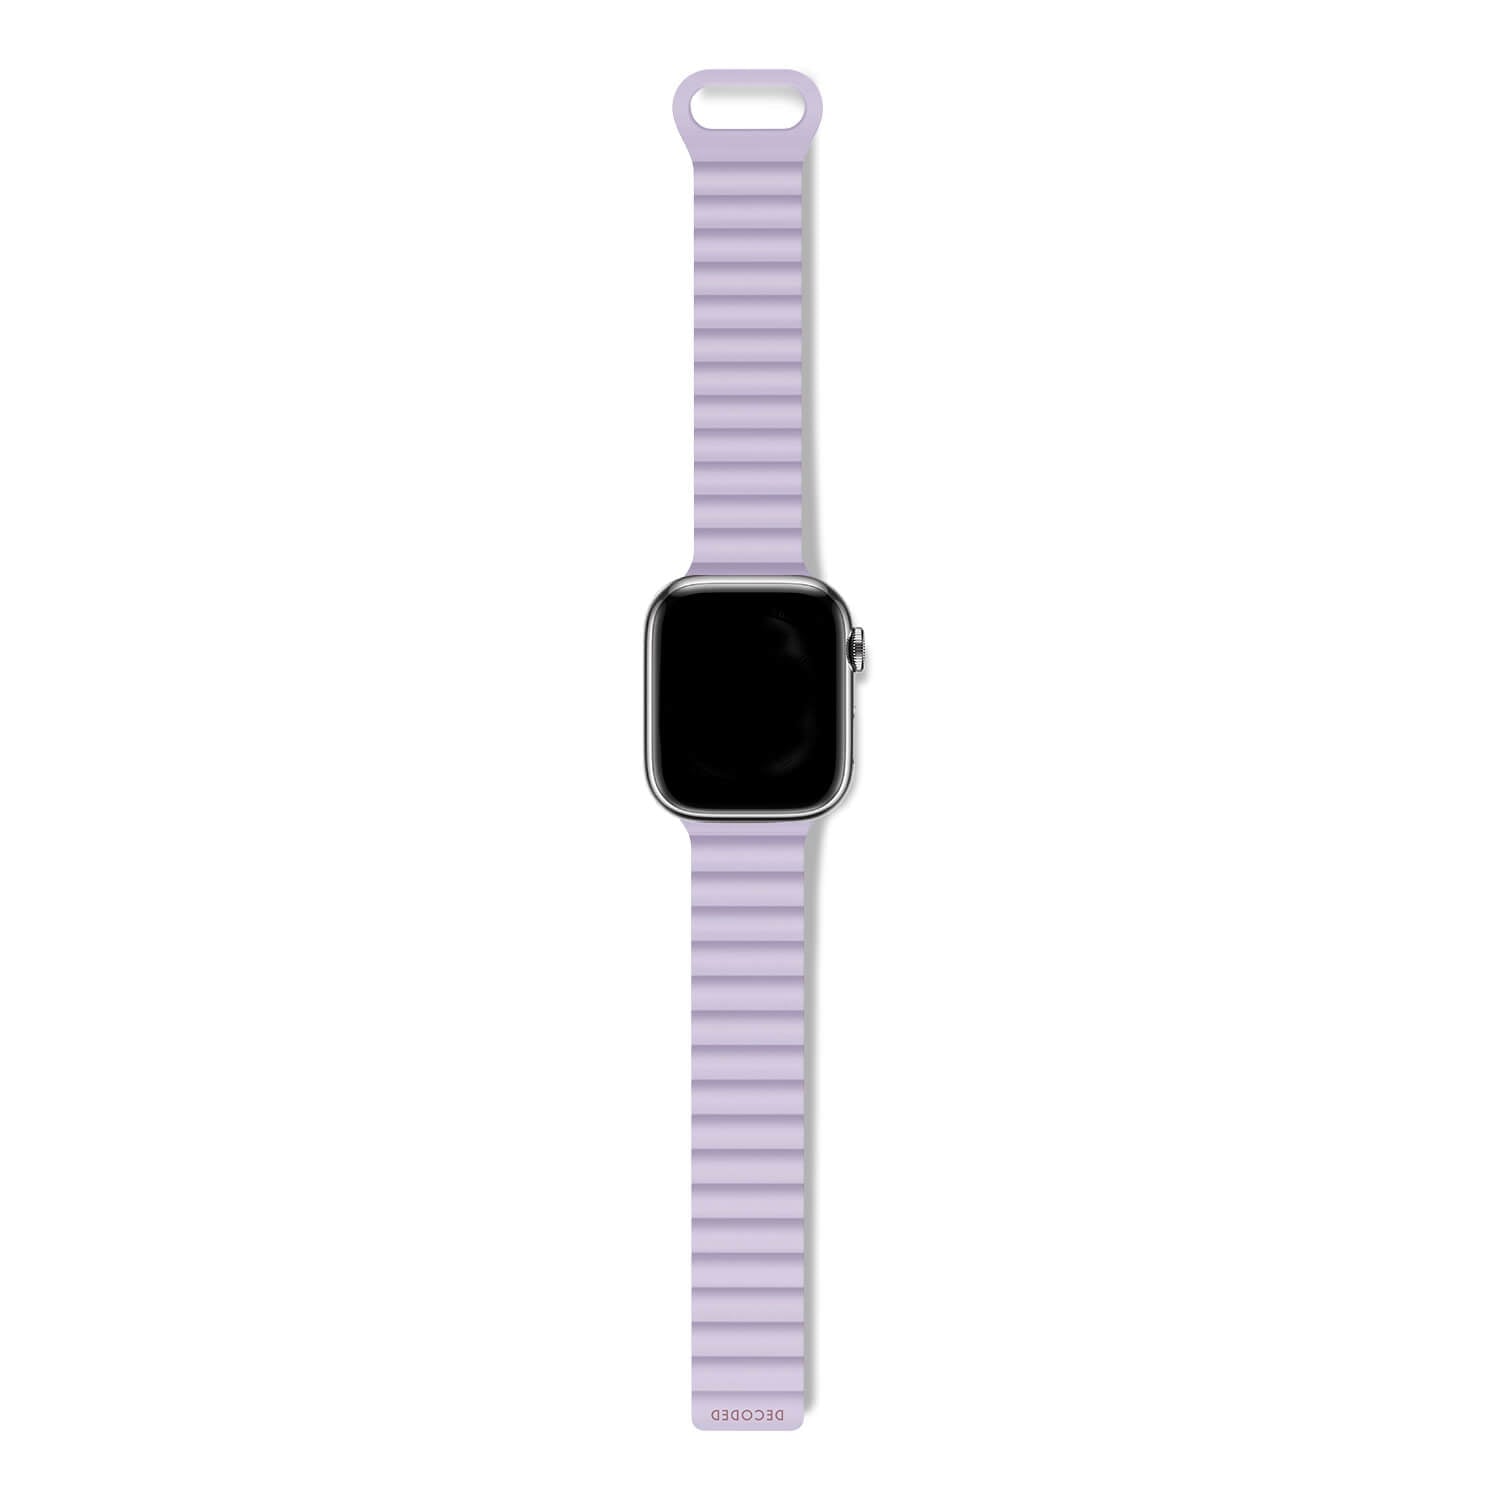 Silicone Traction Loop Strap Apple Watch 38mm, Lavender